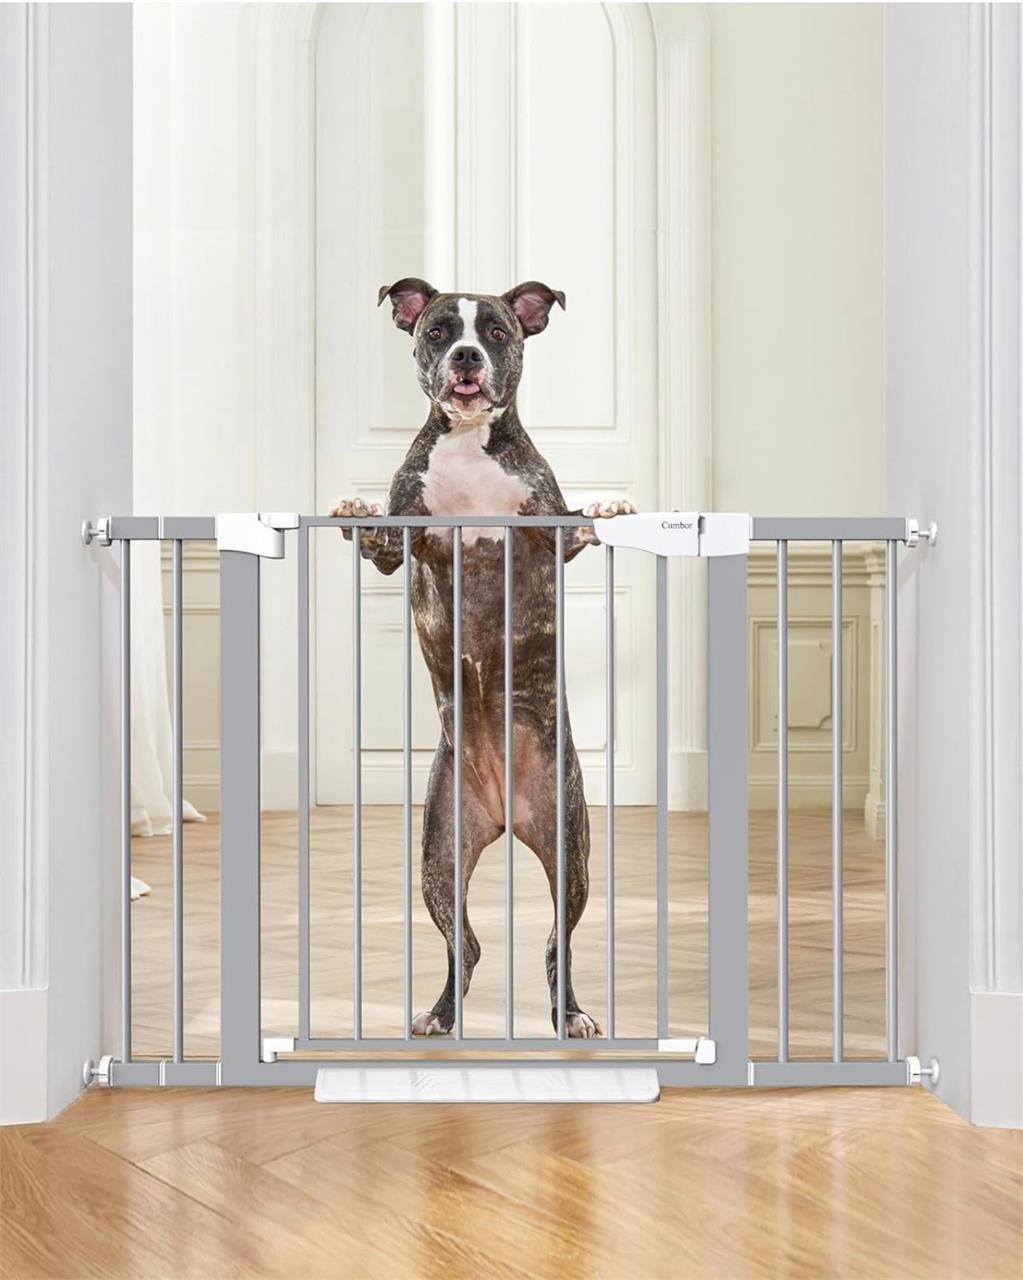 Easy Install Pressure Mounted Pet Gate